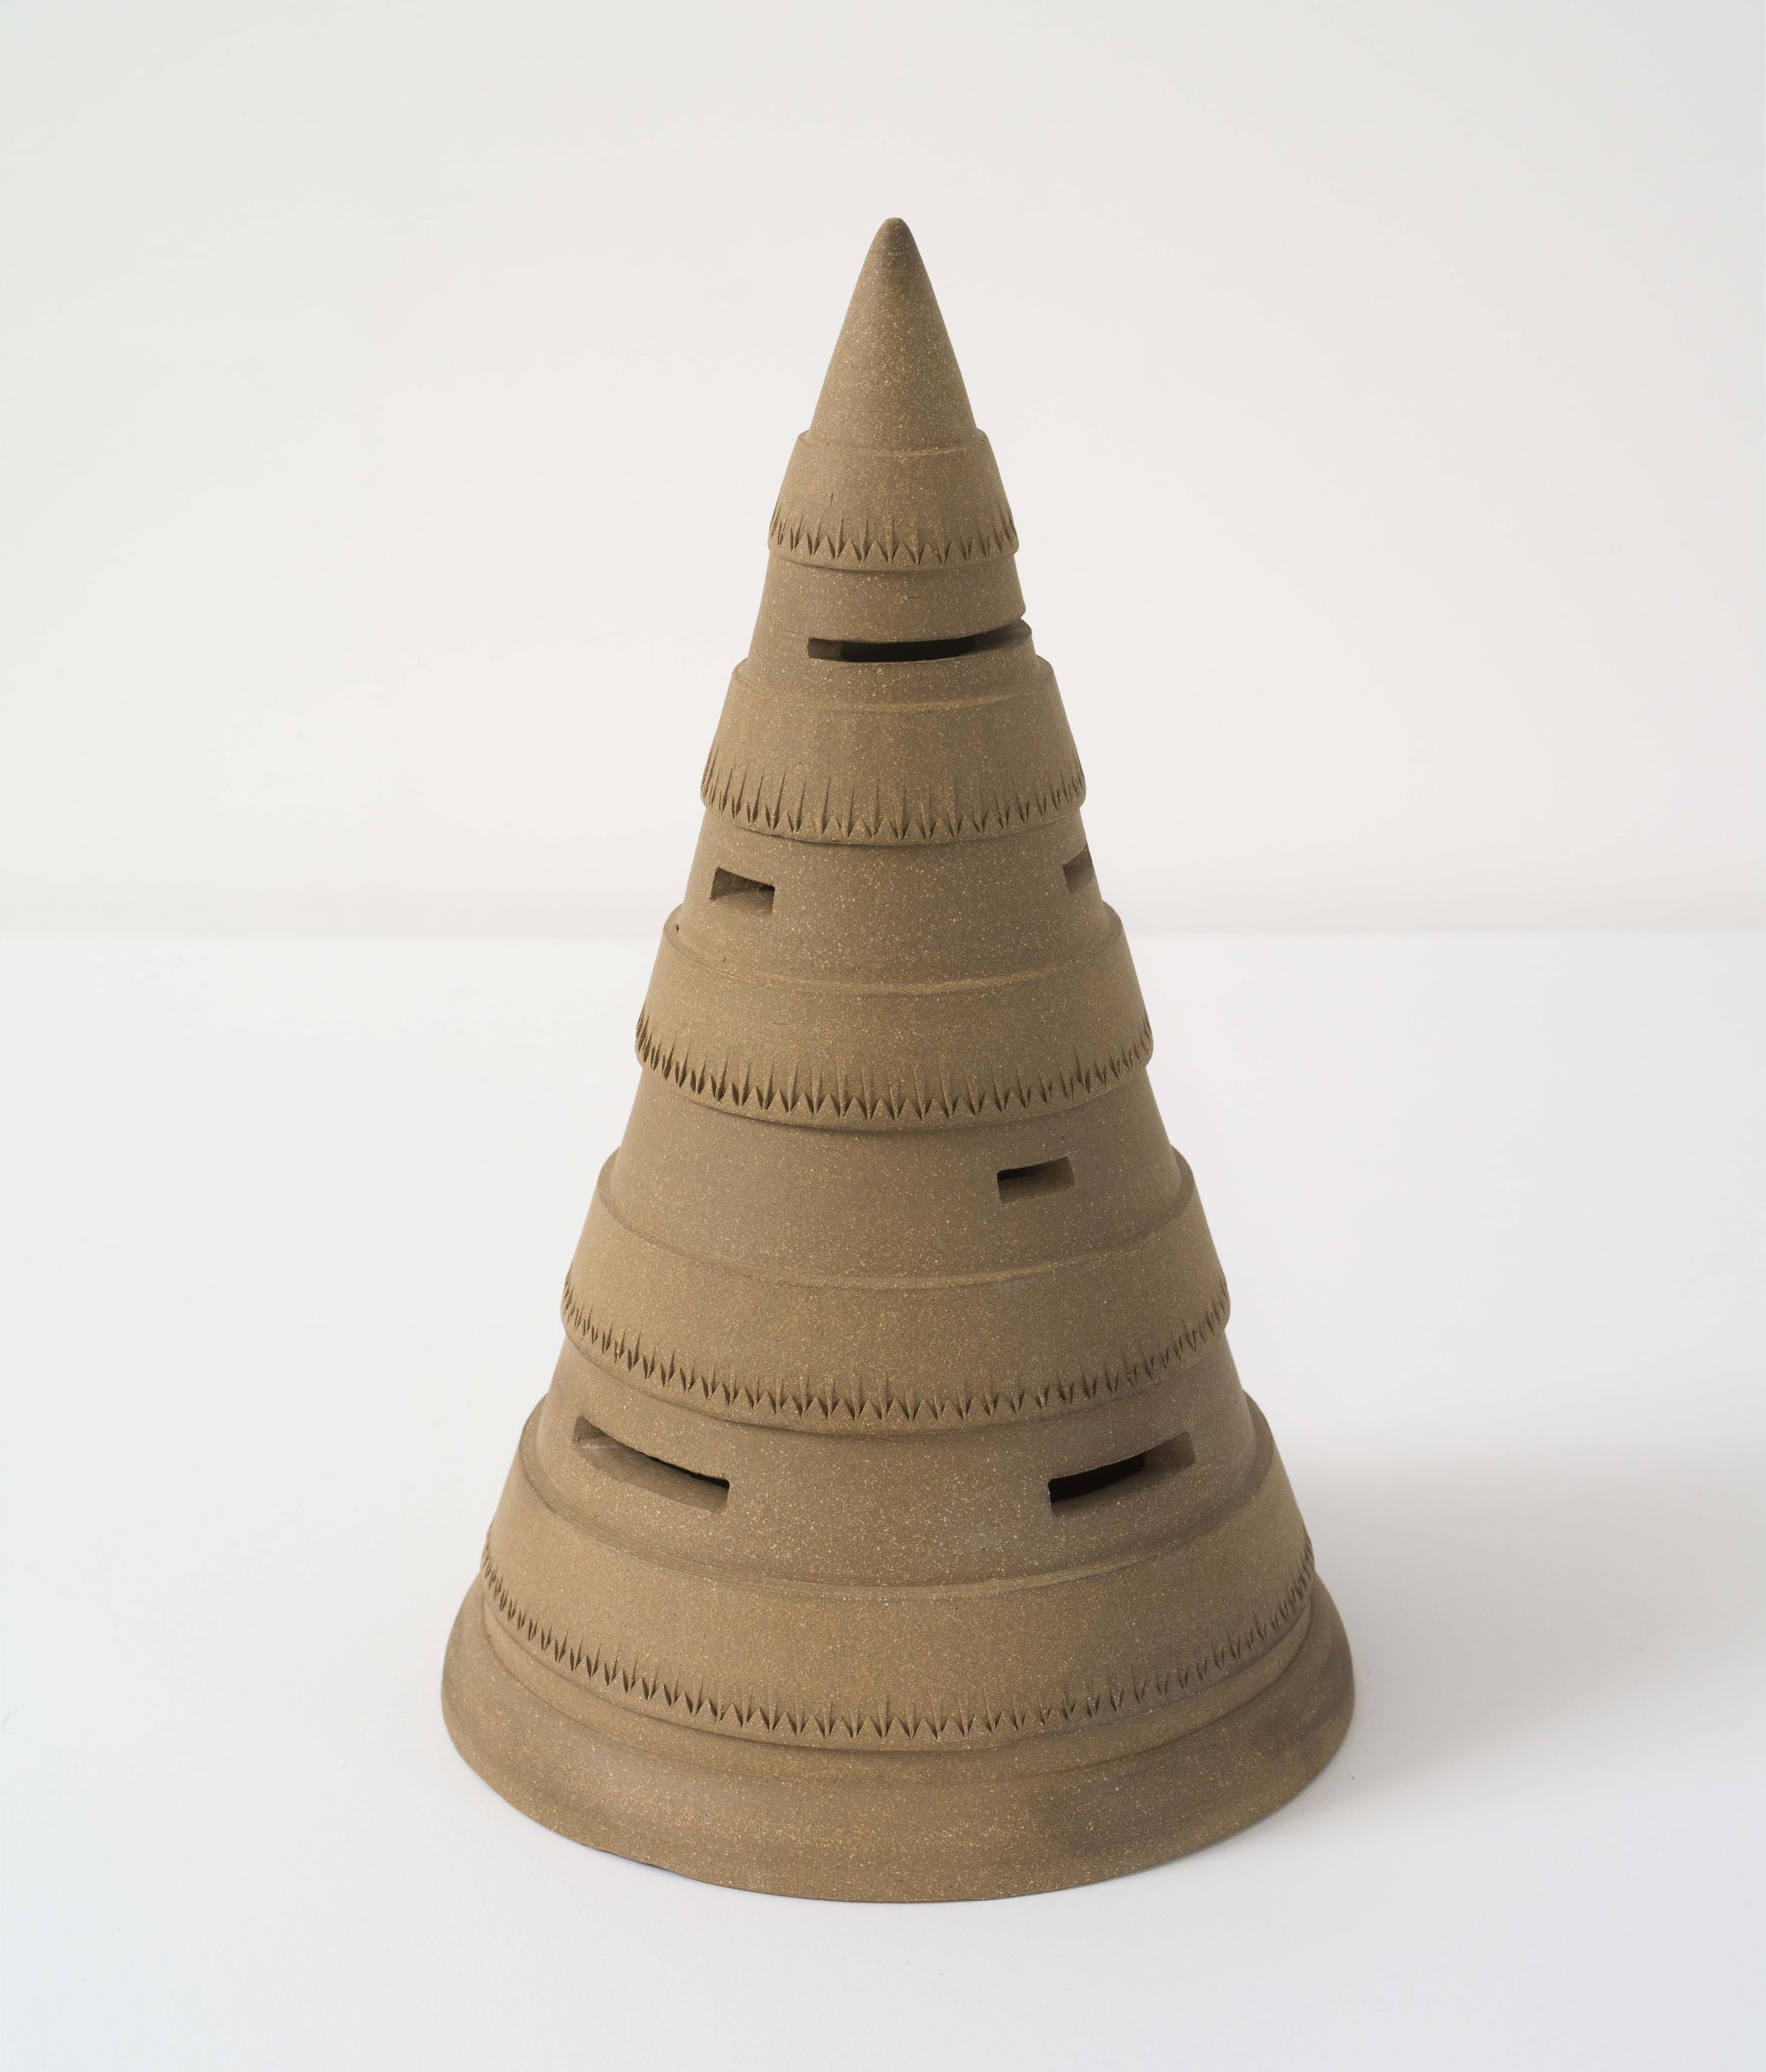 Conical shaped sculpture